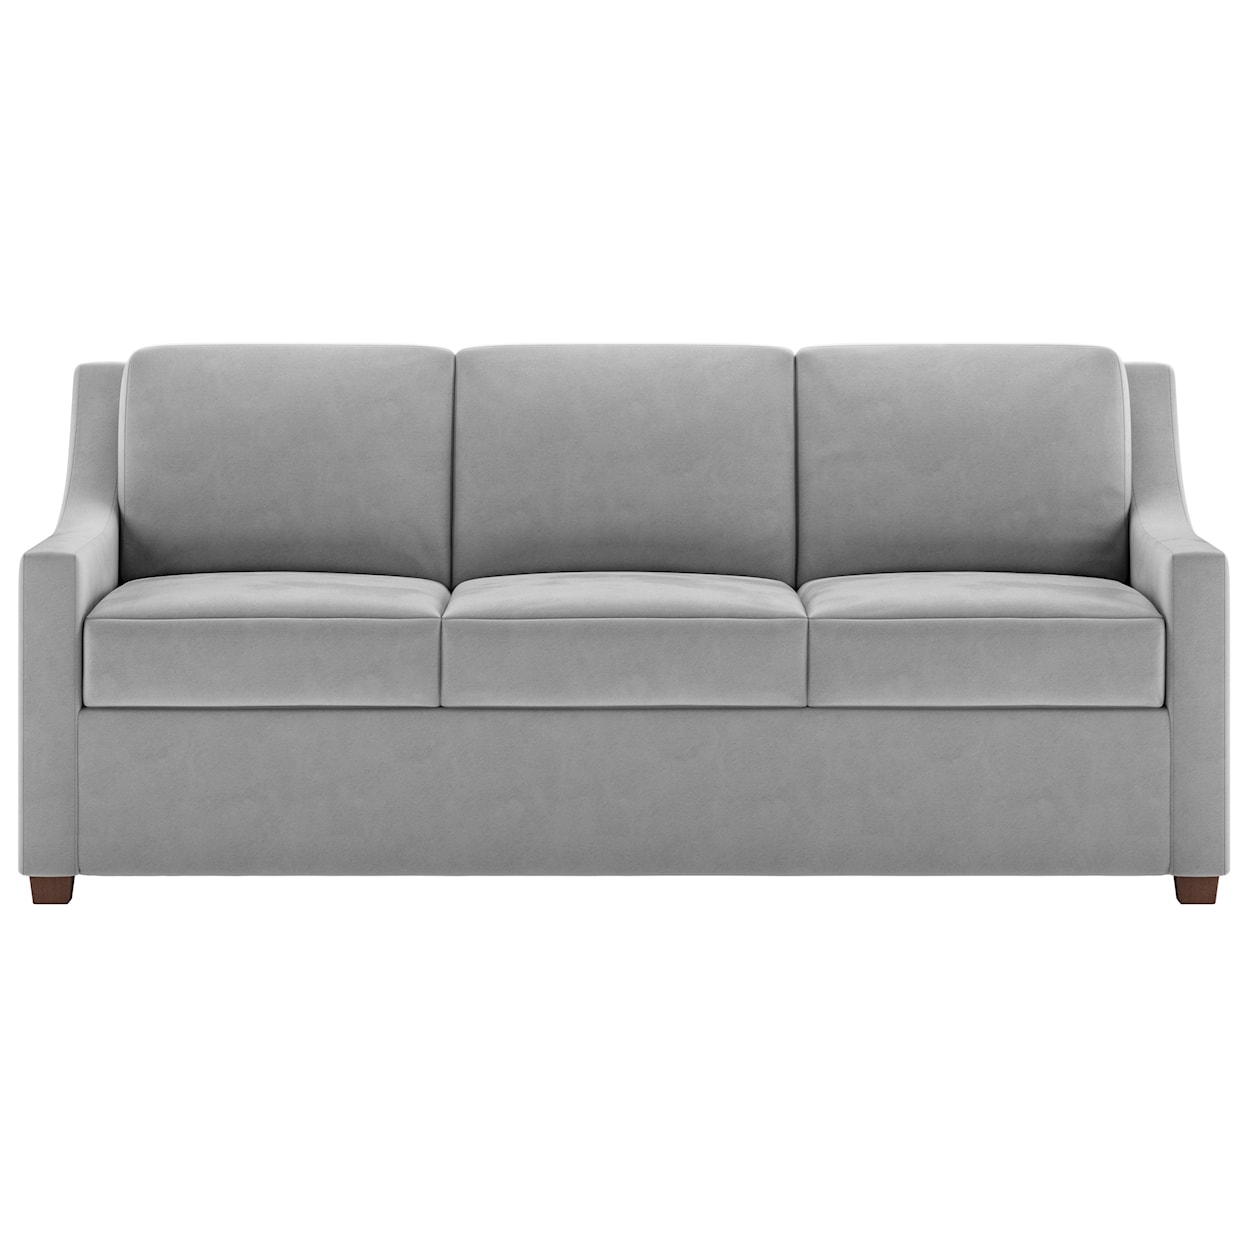 American Leather Perry Queen Plus Sleeper Sofa